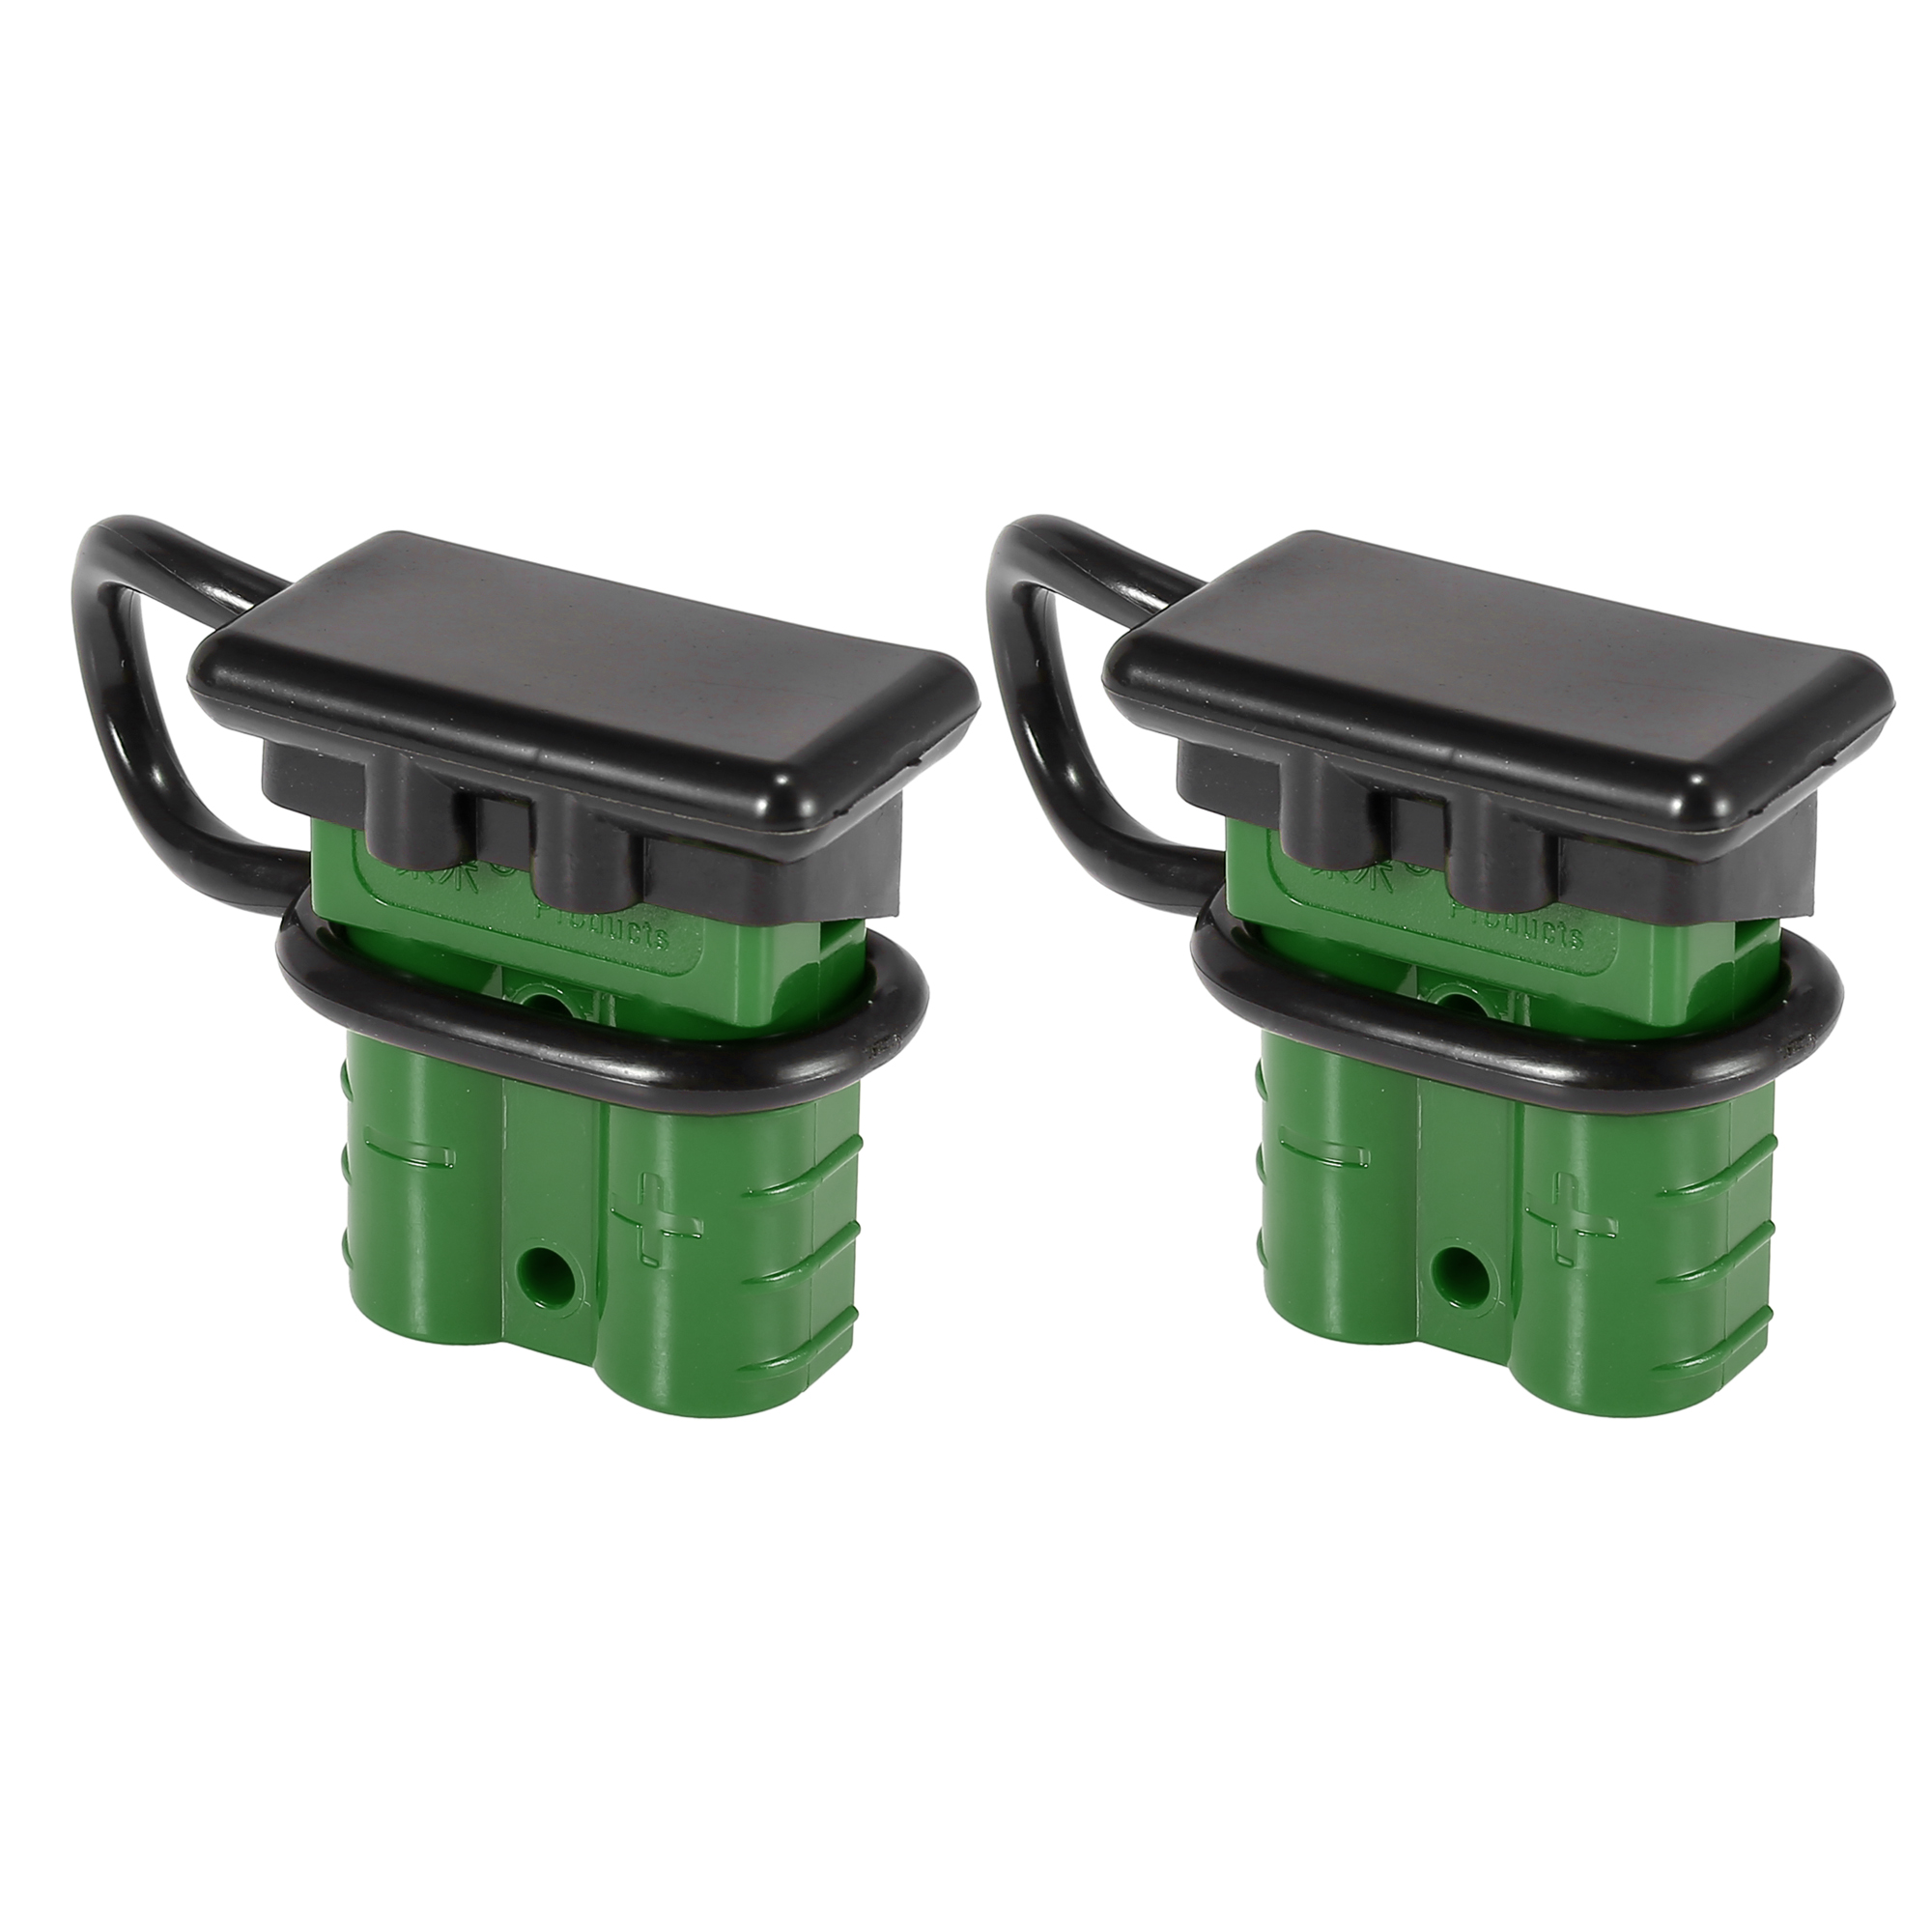 2pcs 600V 50A Battery Quick Connect Disconnect Wire Harness Plug w/ Cover  for Trailer Forklift 7 8 10 AWG Green